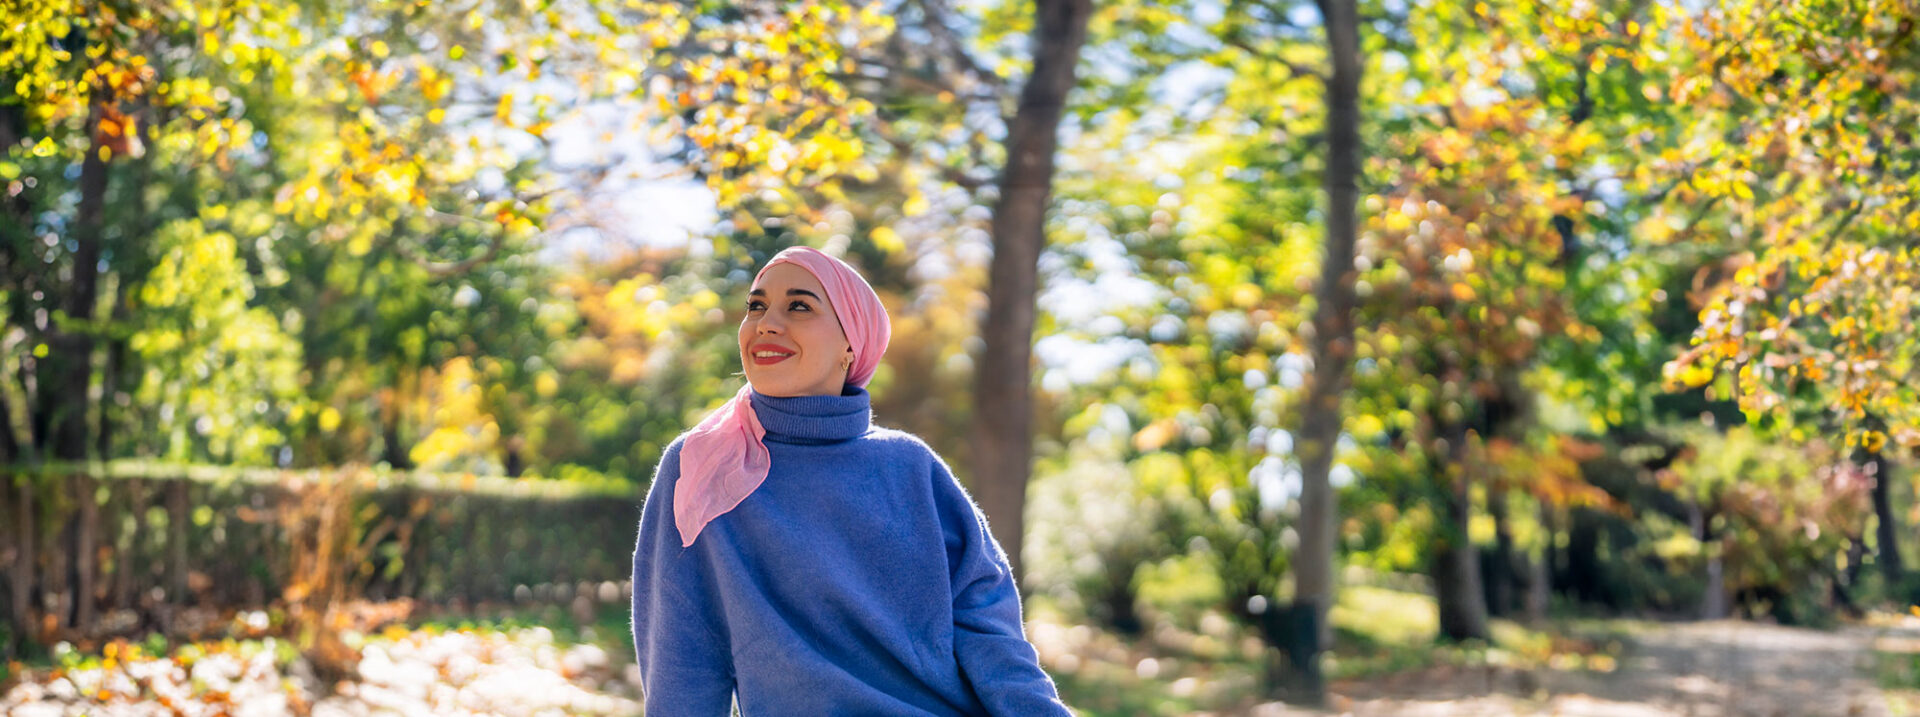 Confident woman in the forest for breast cancer awareness against urban background